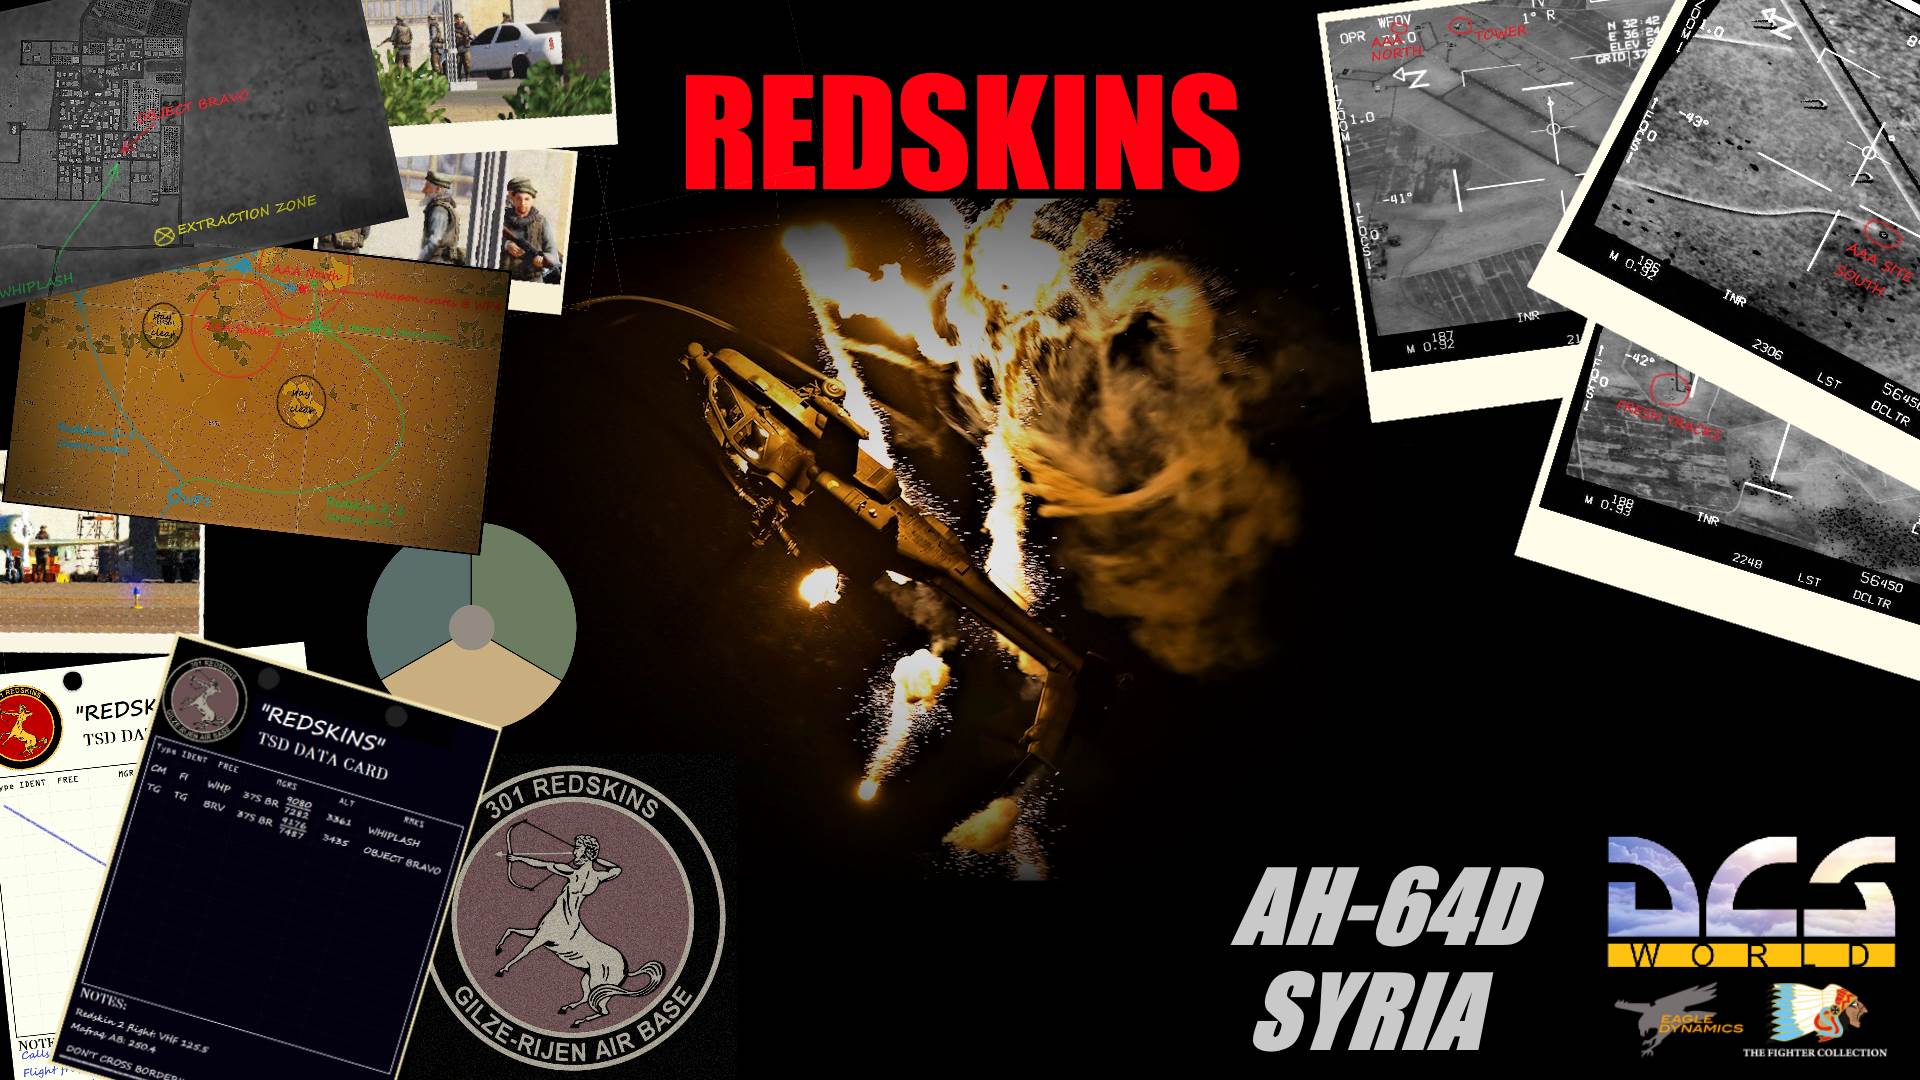 301 REDSKINS - MINI CAMPAIGN - SYRIA CO-OP COMPATIBLE VERSION